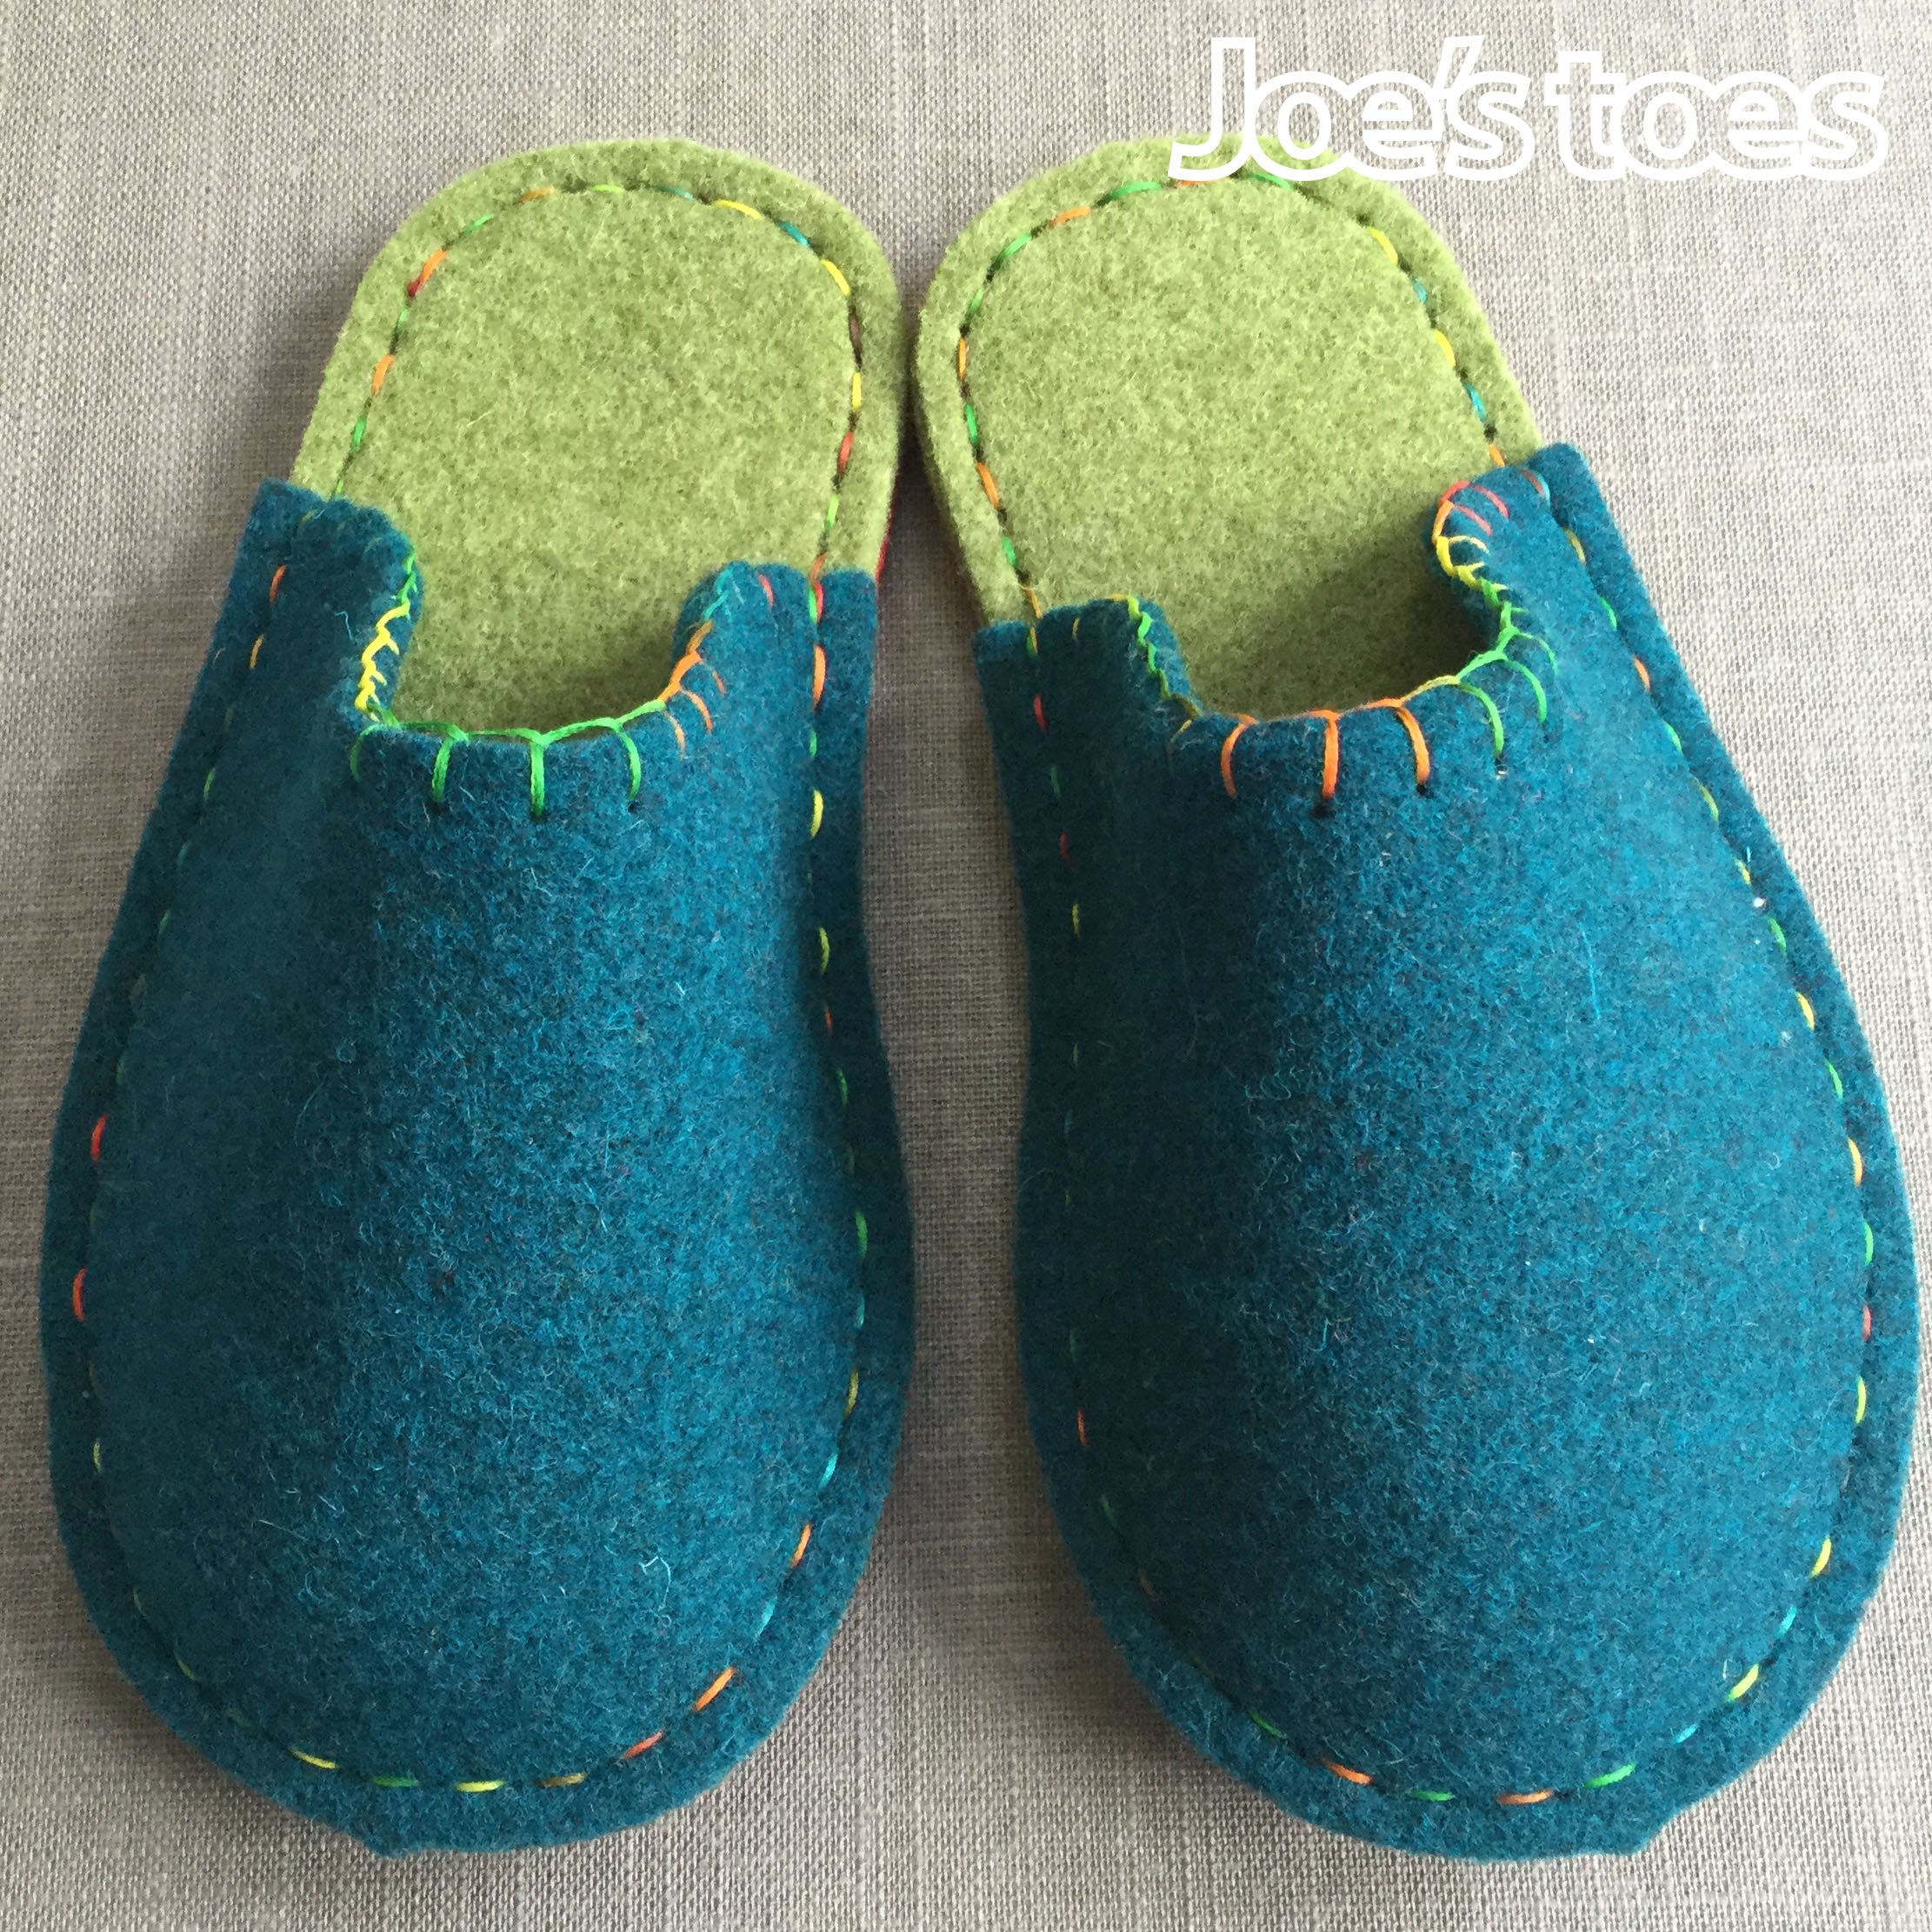 Design your own Slippers! Kits for adults and children – Joe's Toes